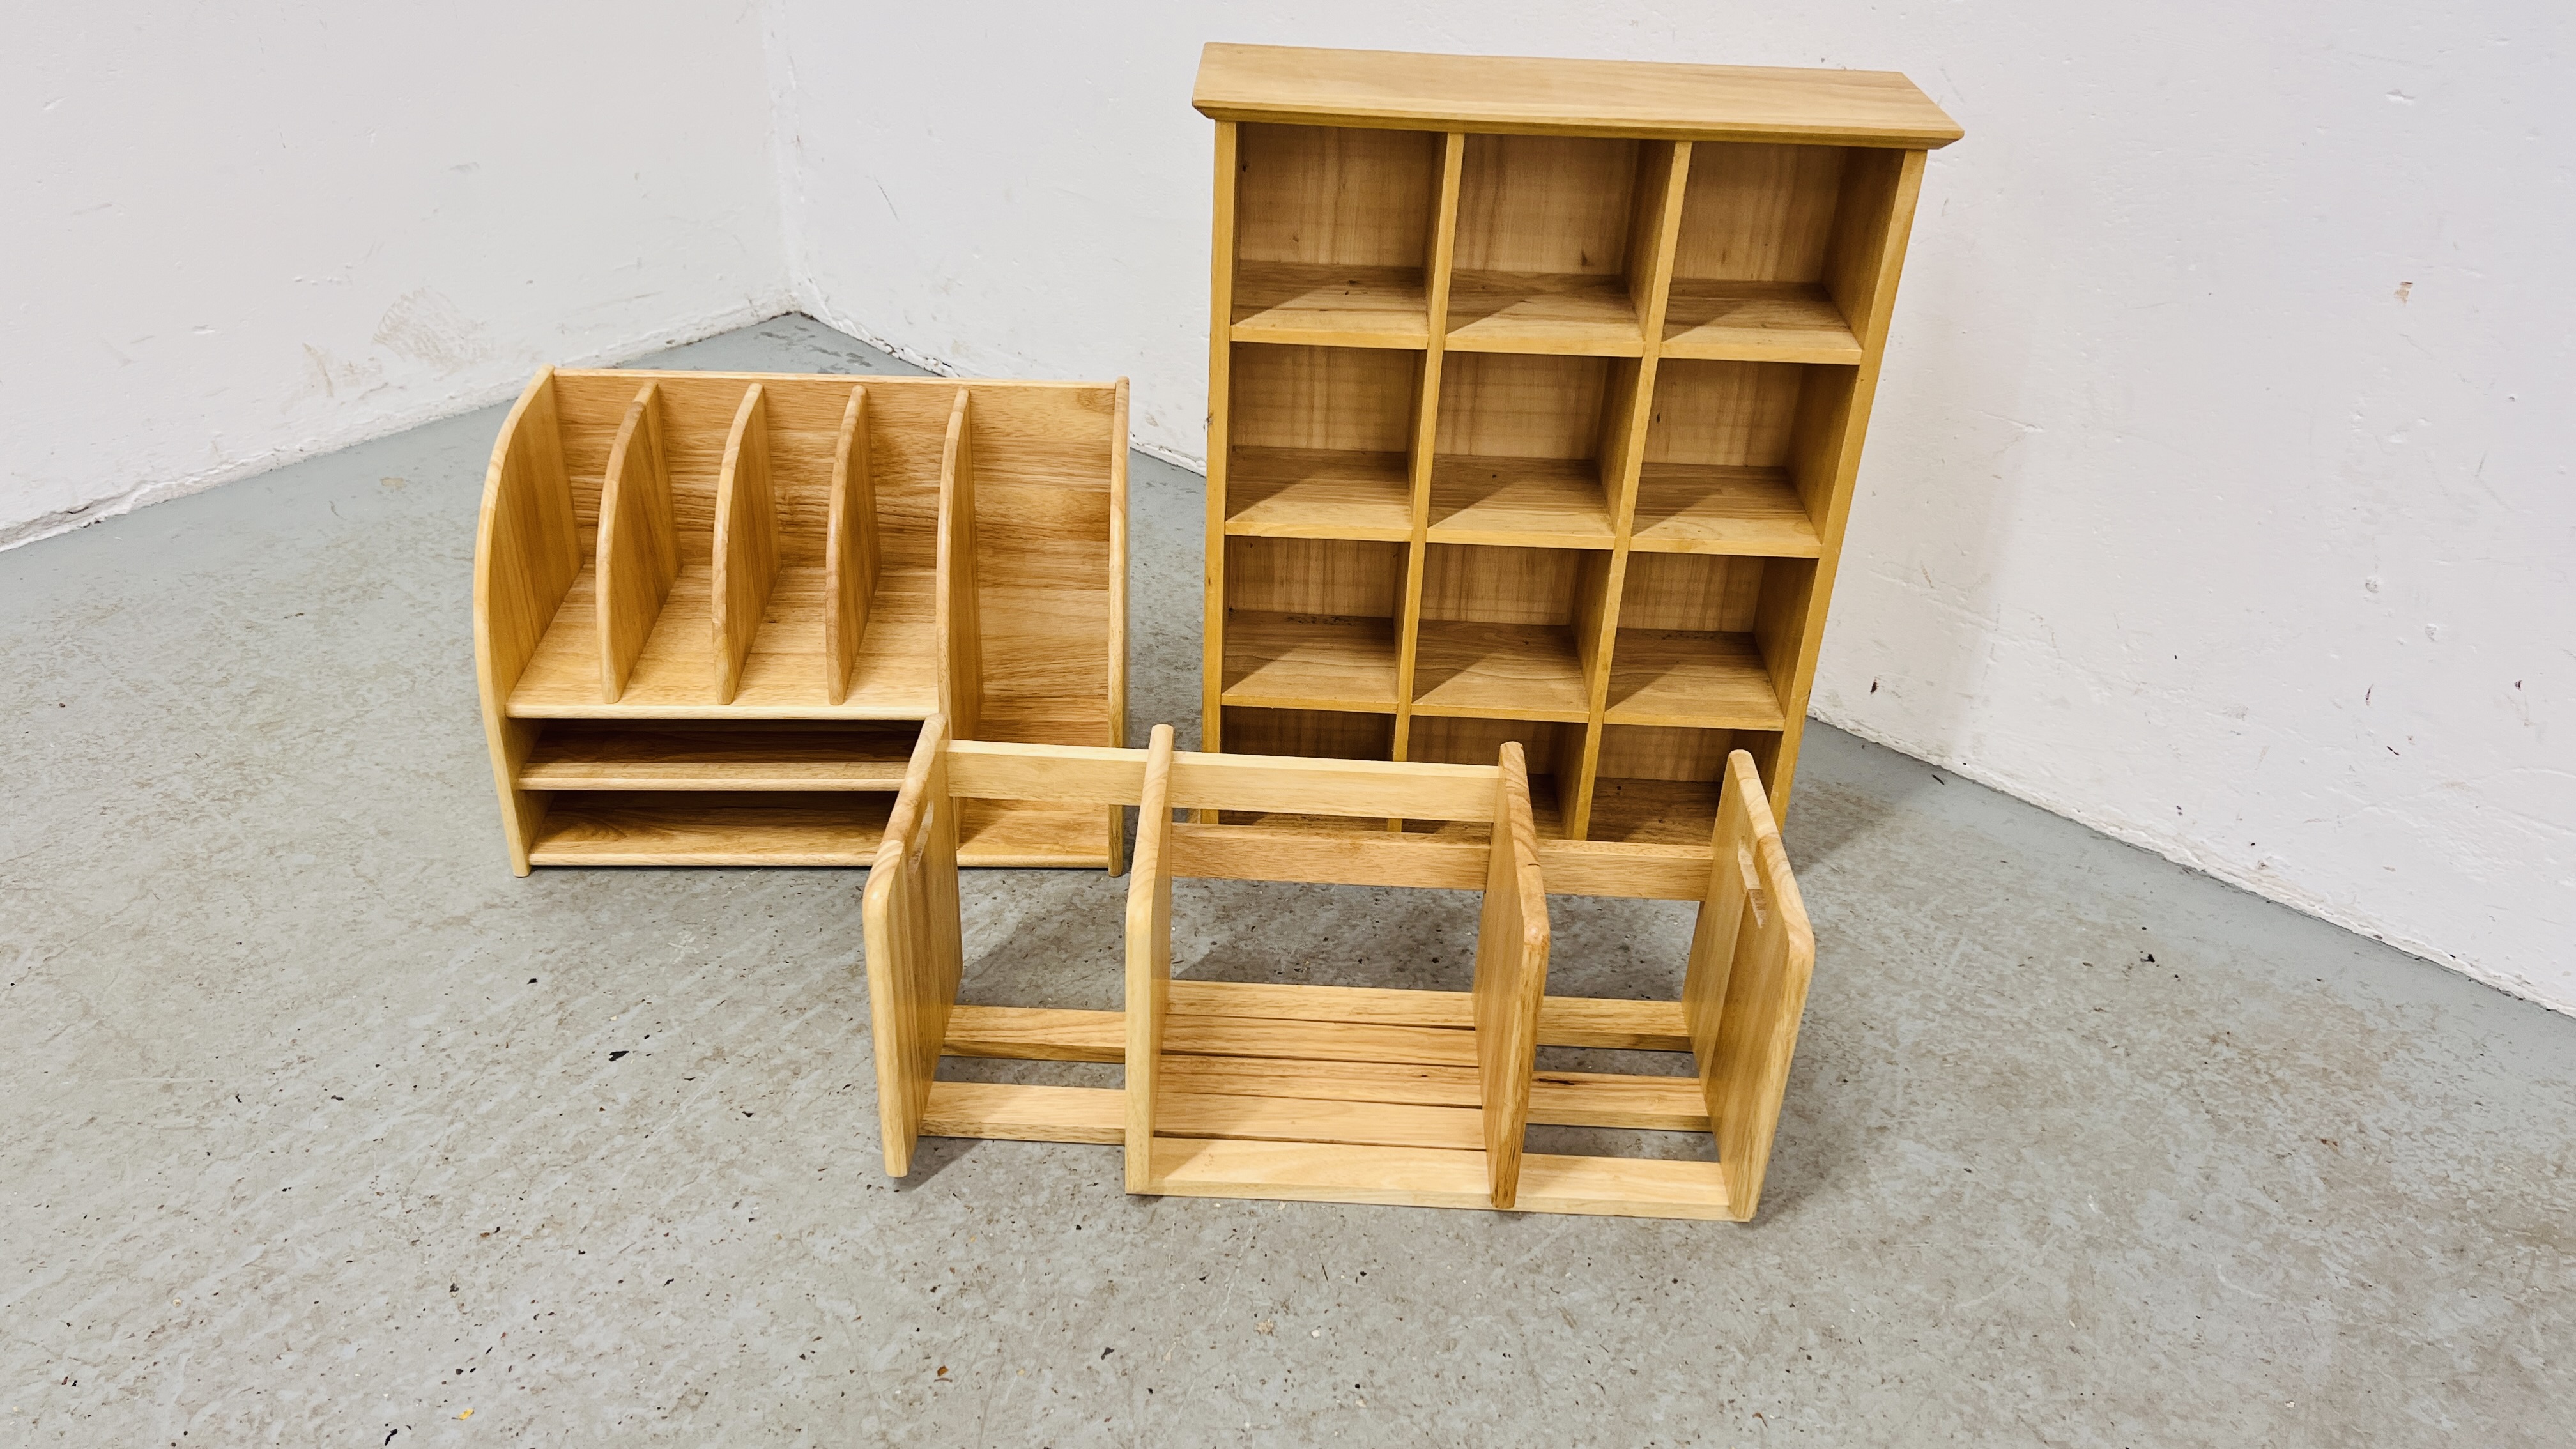 A BEECHWOOD DESK TIDY ALONG WITH EXTENDING BOOK RACK AND 12 PIGEON HOLE SHELVING RACK.